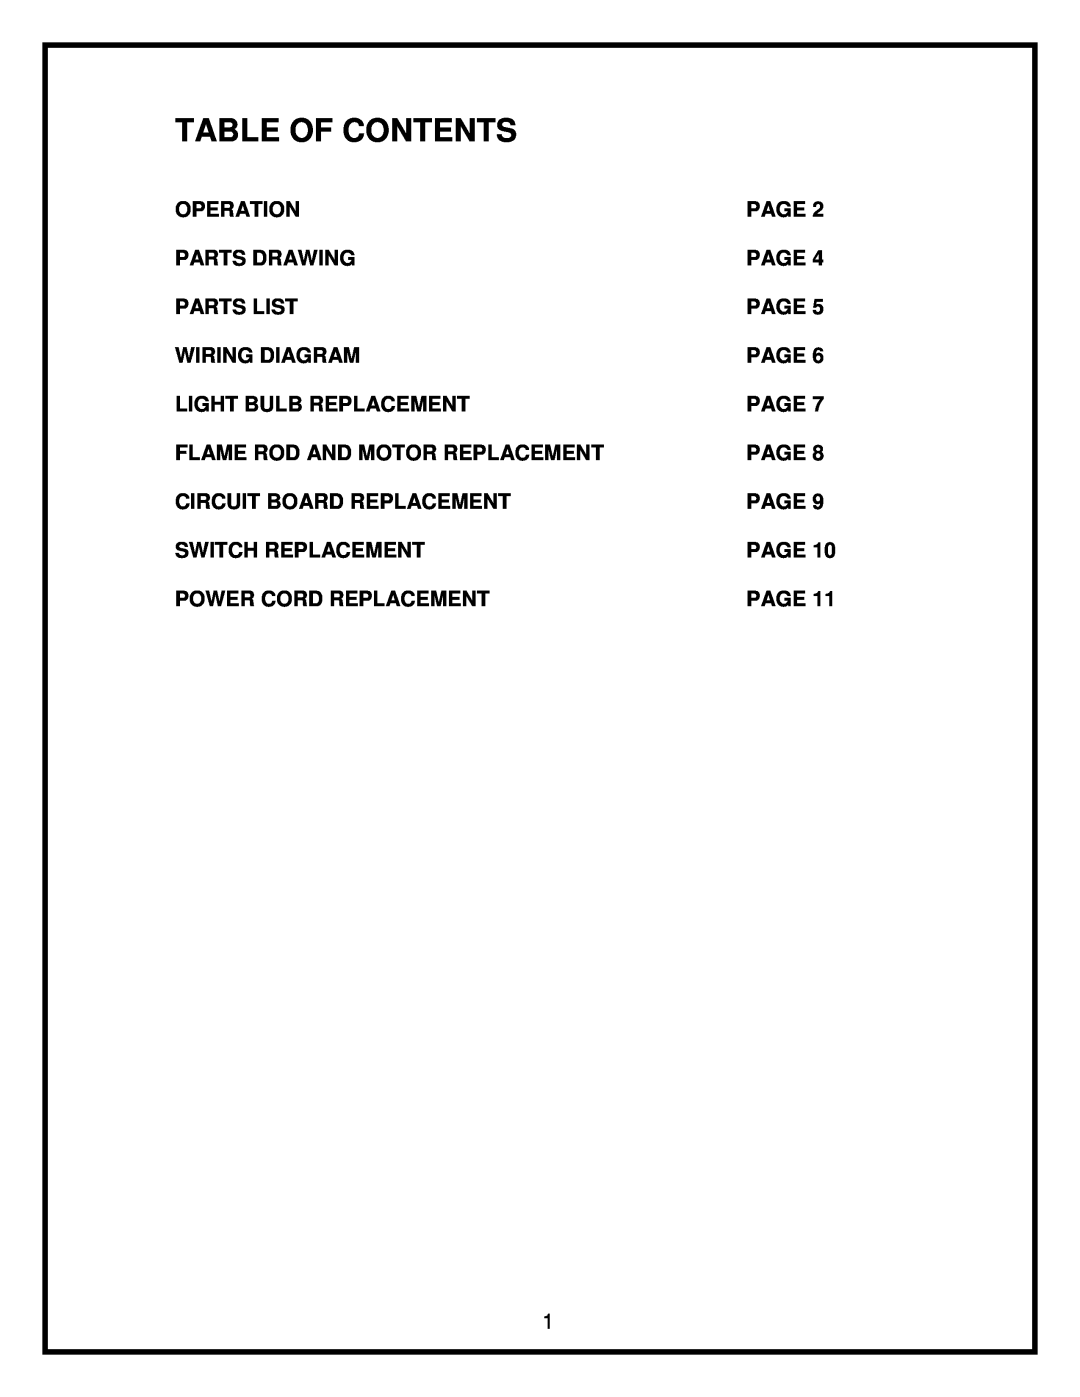 Dimplex EOS2006 service manual Table Of Contents 